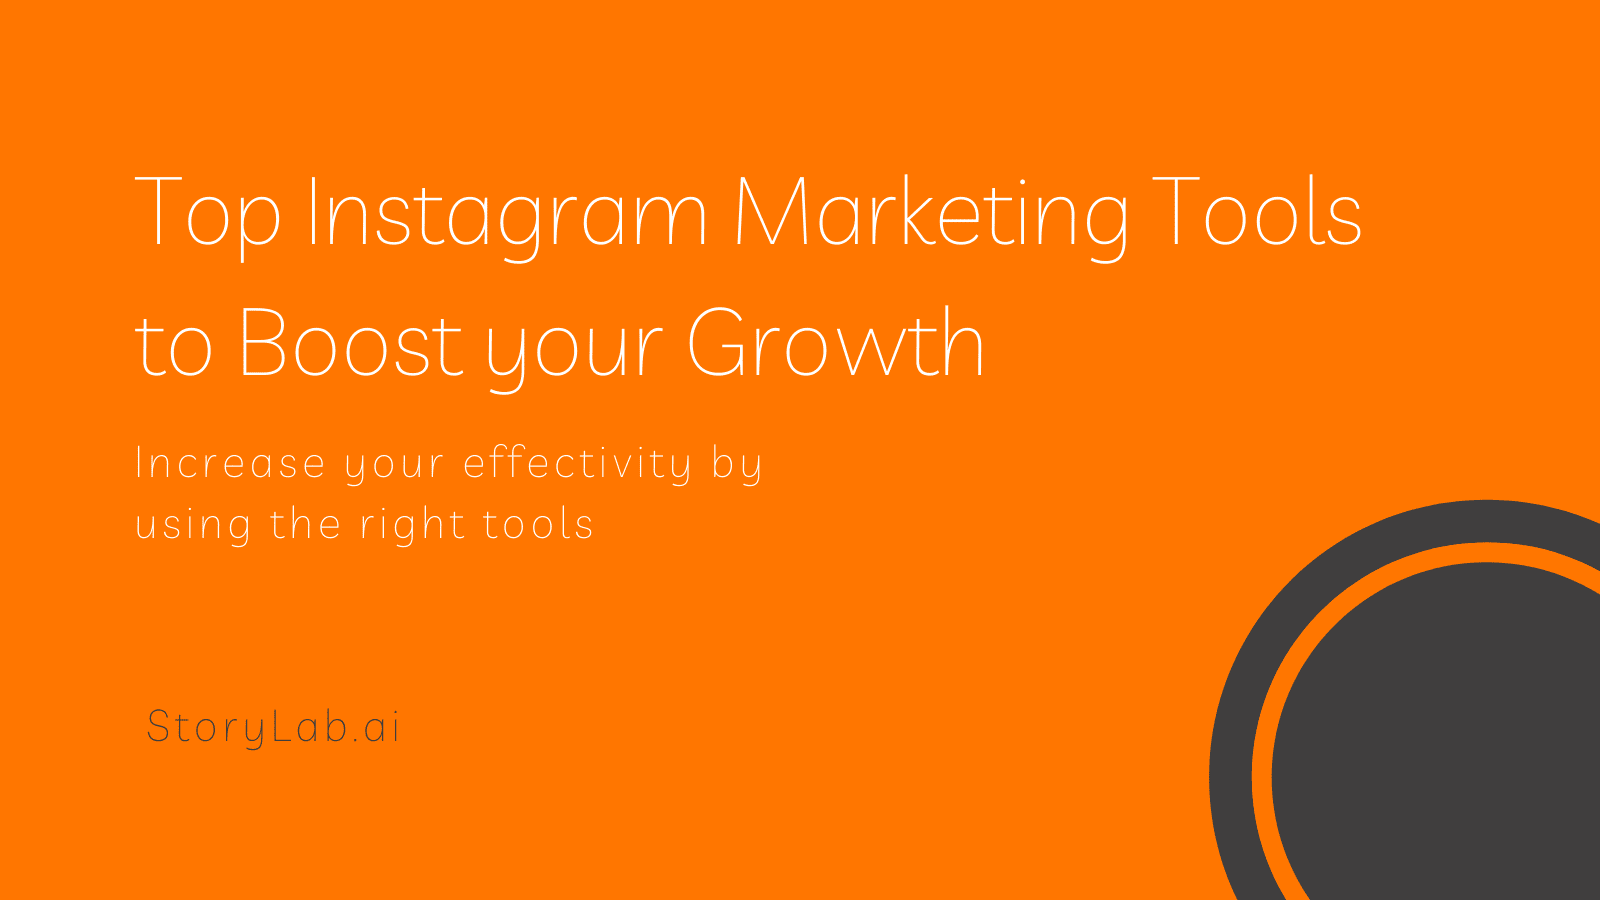 Top Instagram Marketing Tools to Boost your Growth